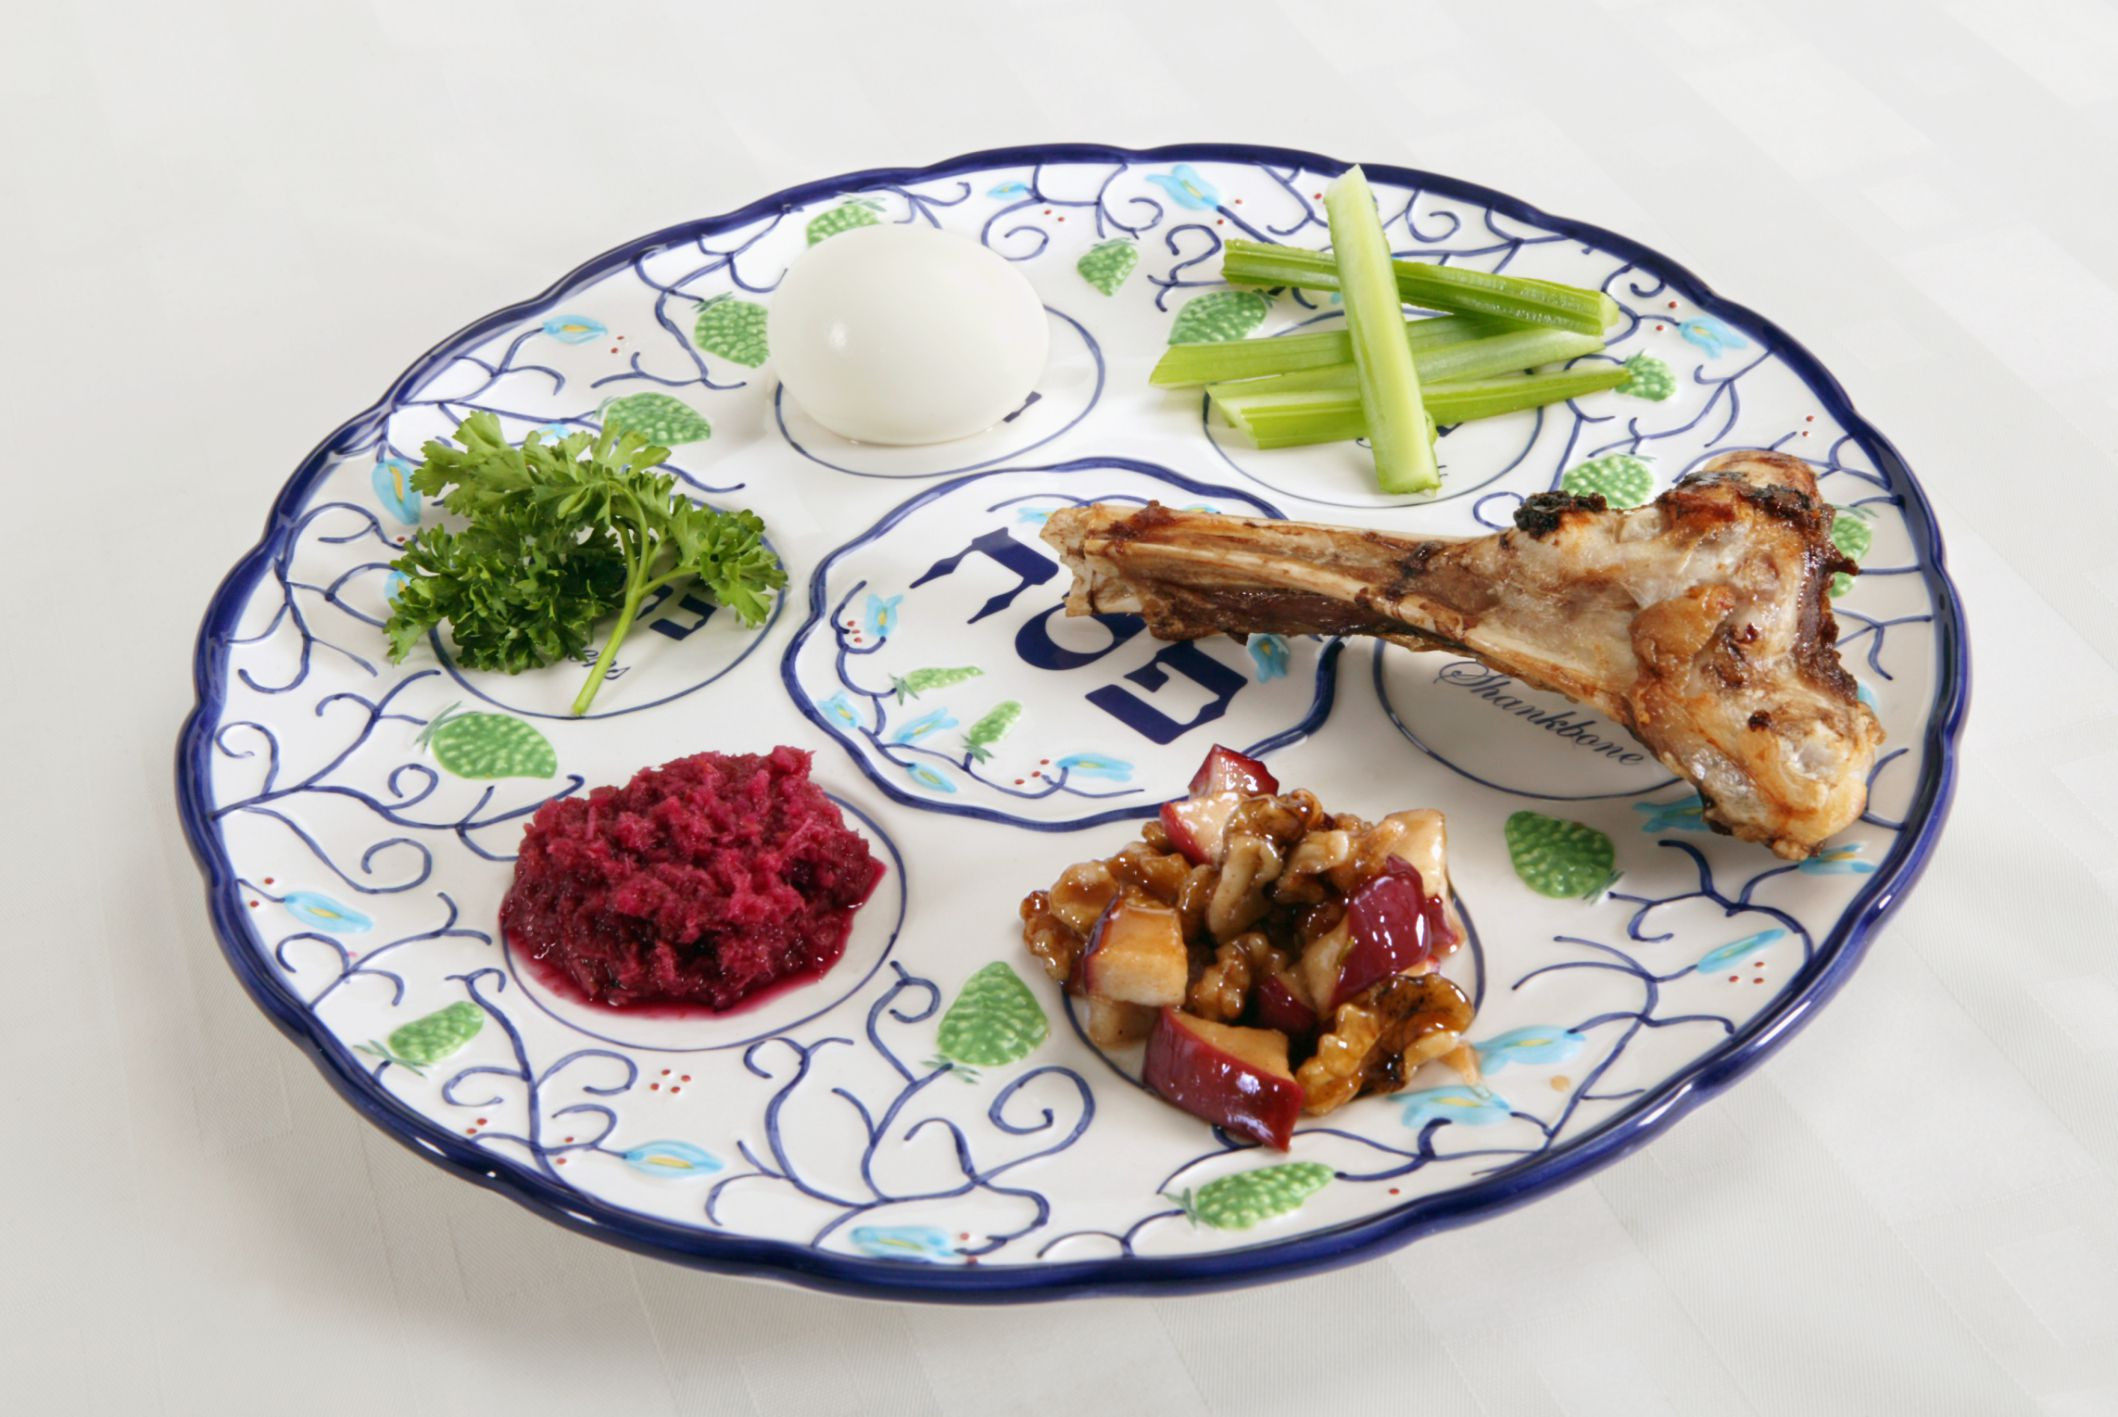 24 Ideas for Passover Seder Food Home, Family, Style and Art Ideas